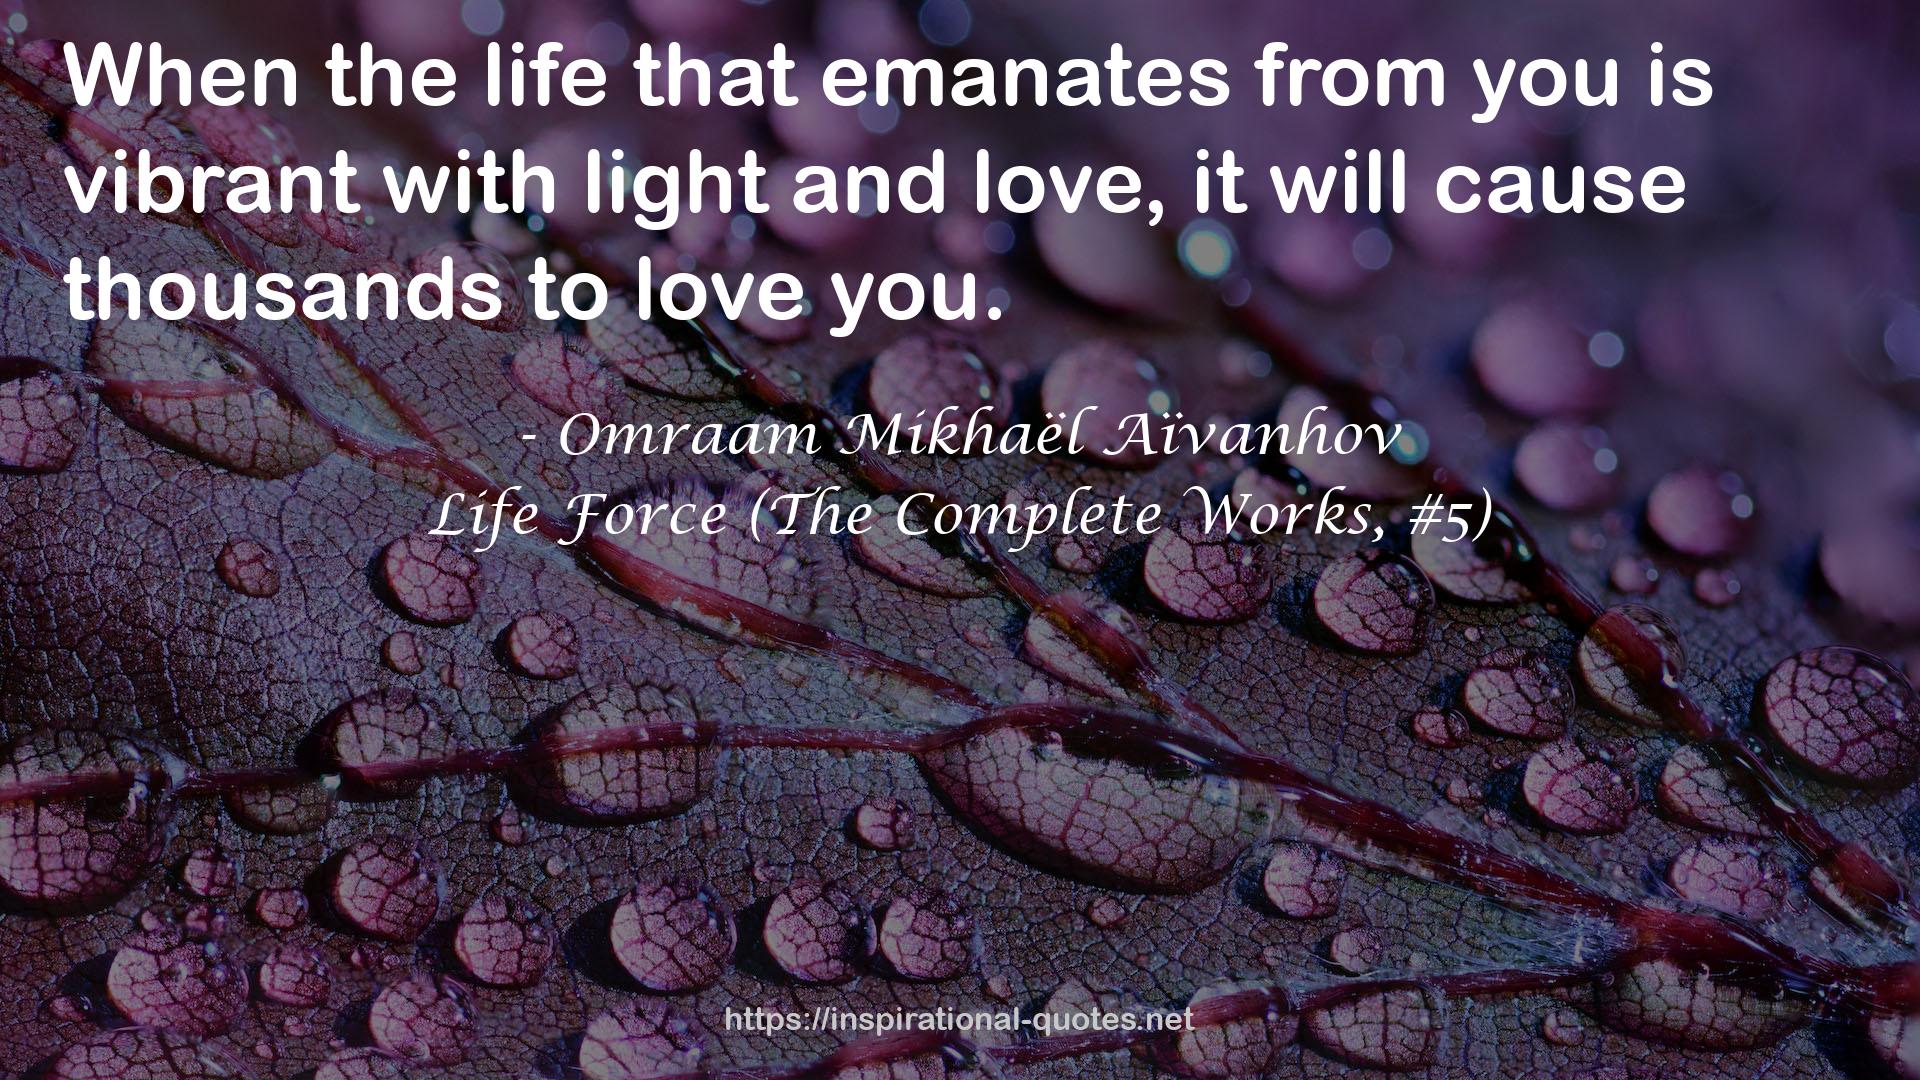 Life Force (The Complete Works, #5) QUOTES